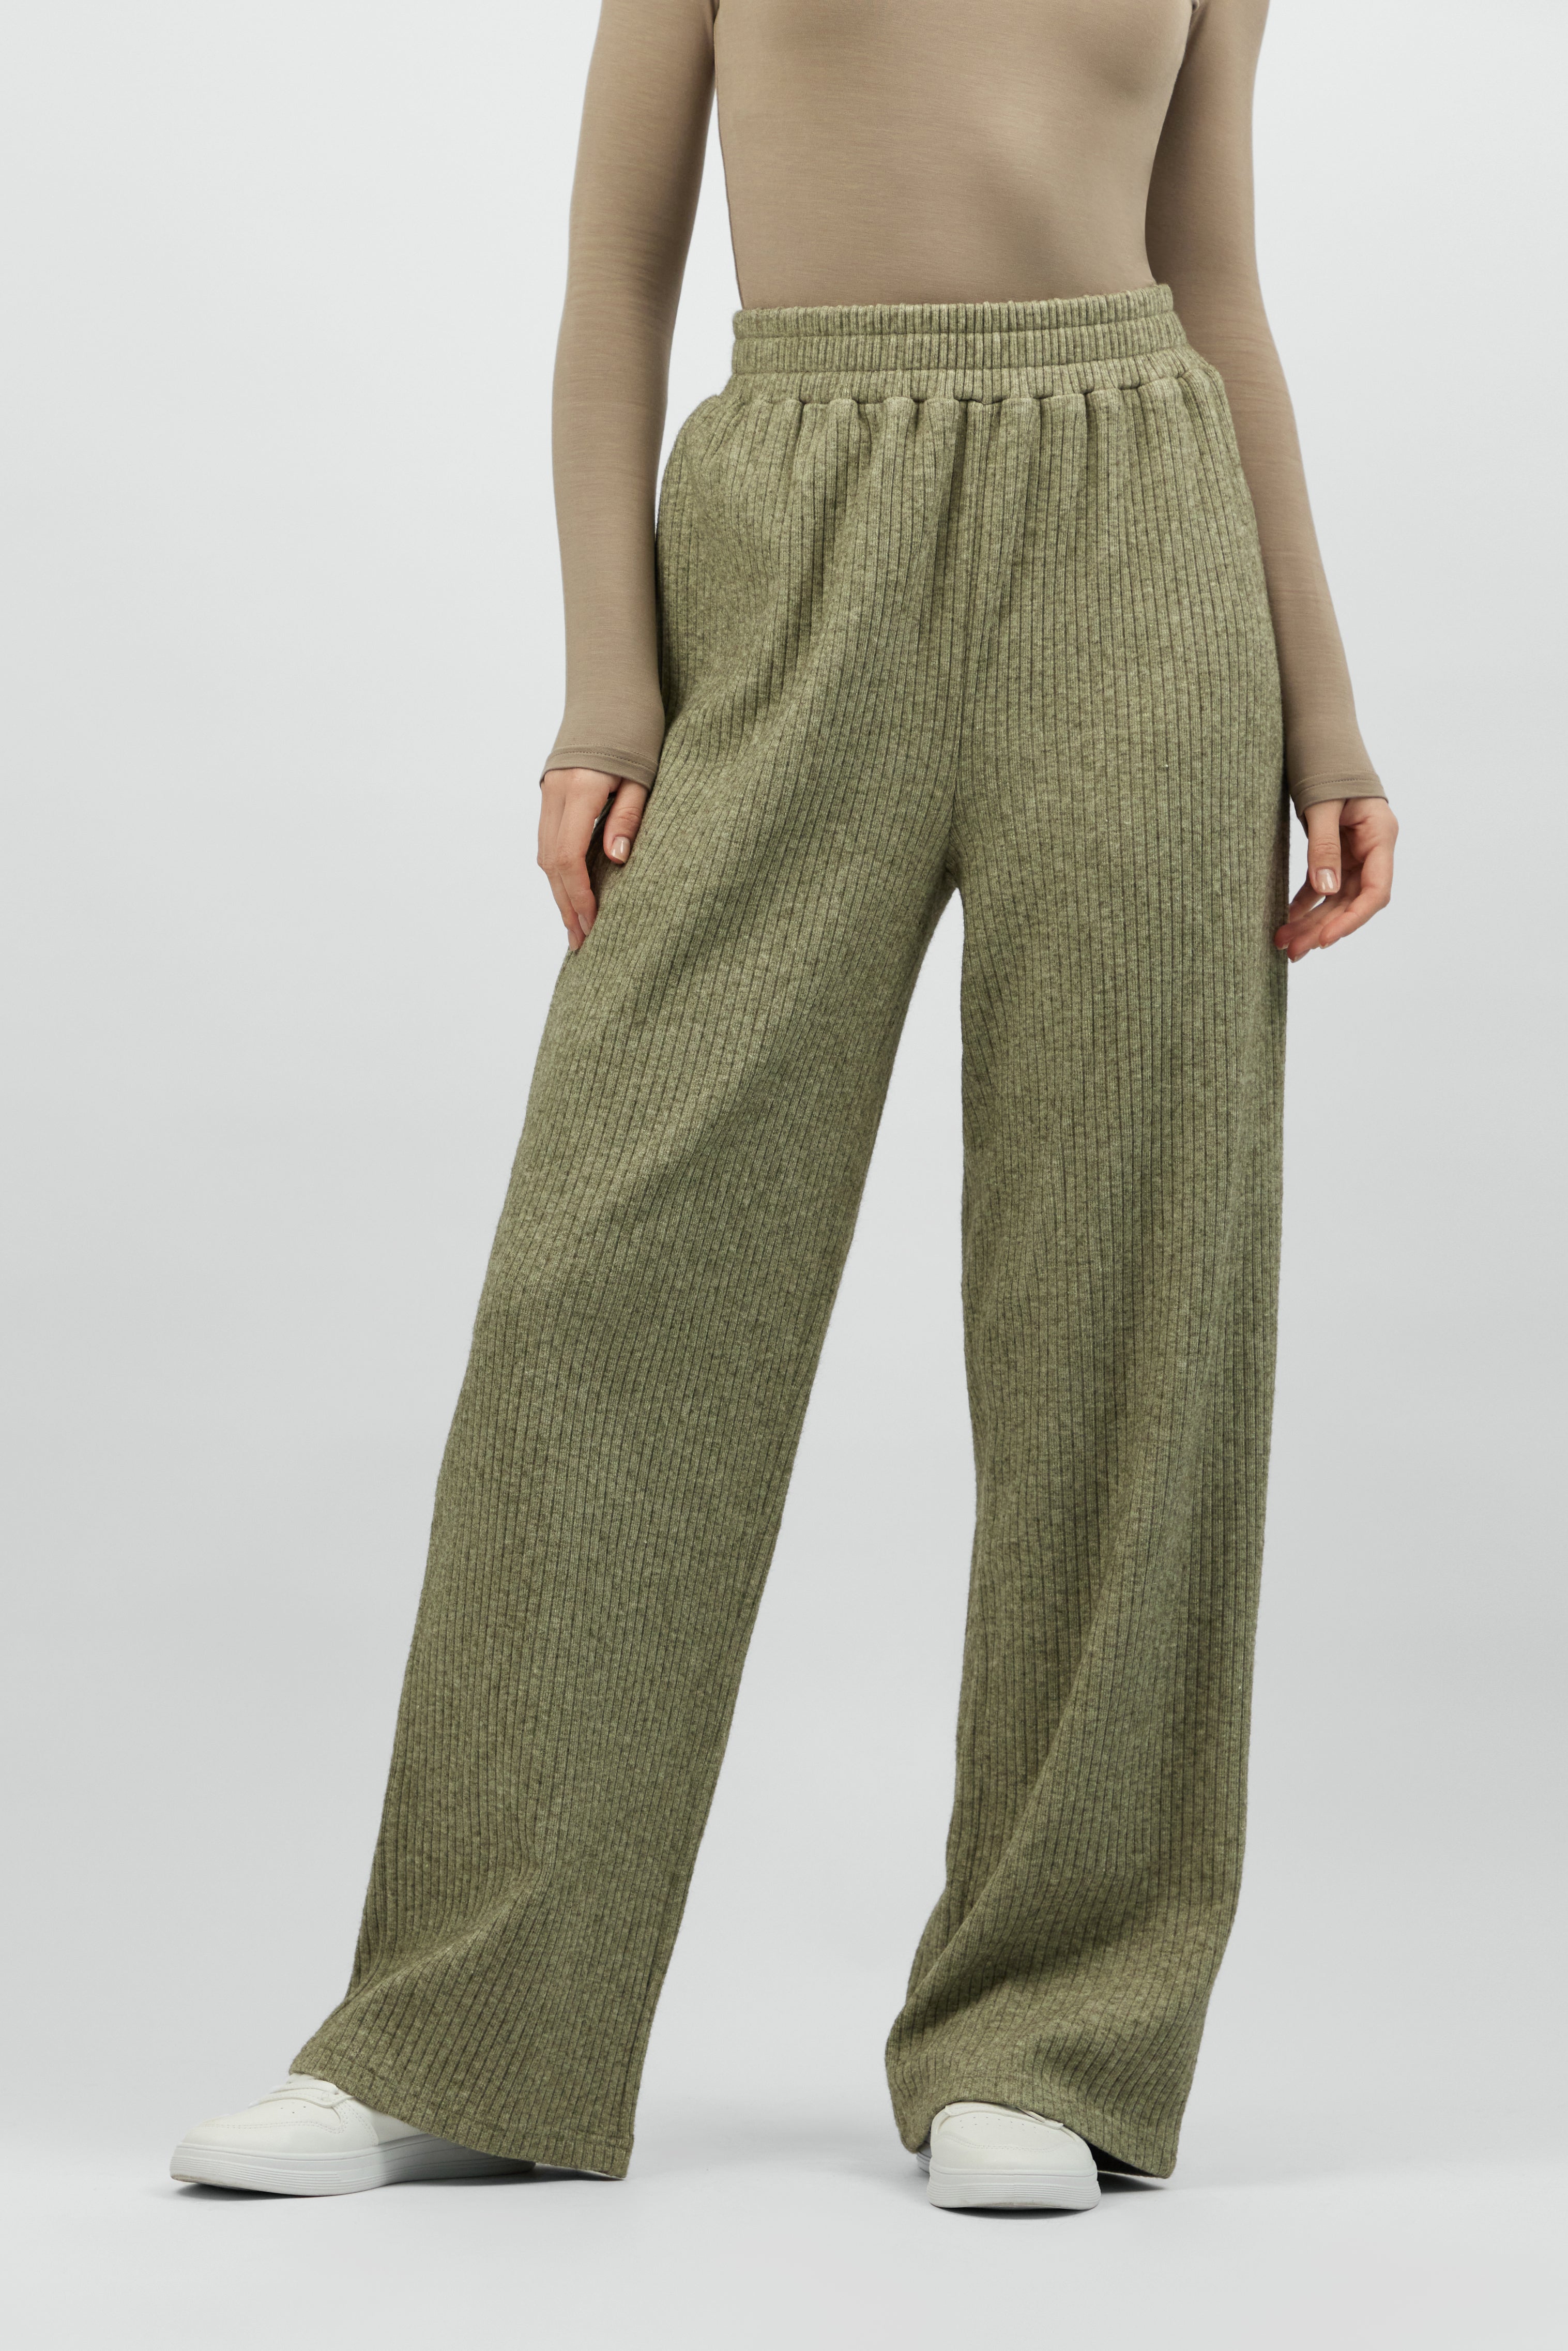 CA - Knit Relaxed Fit Pants - Olive